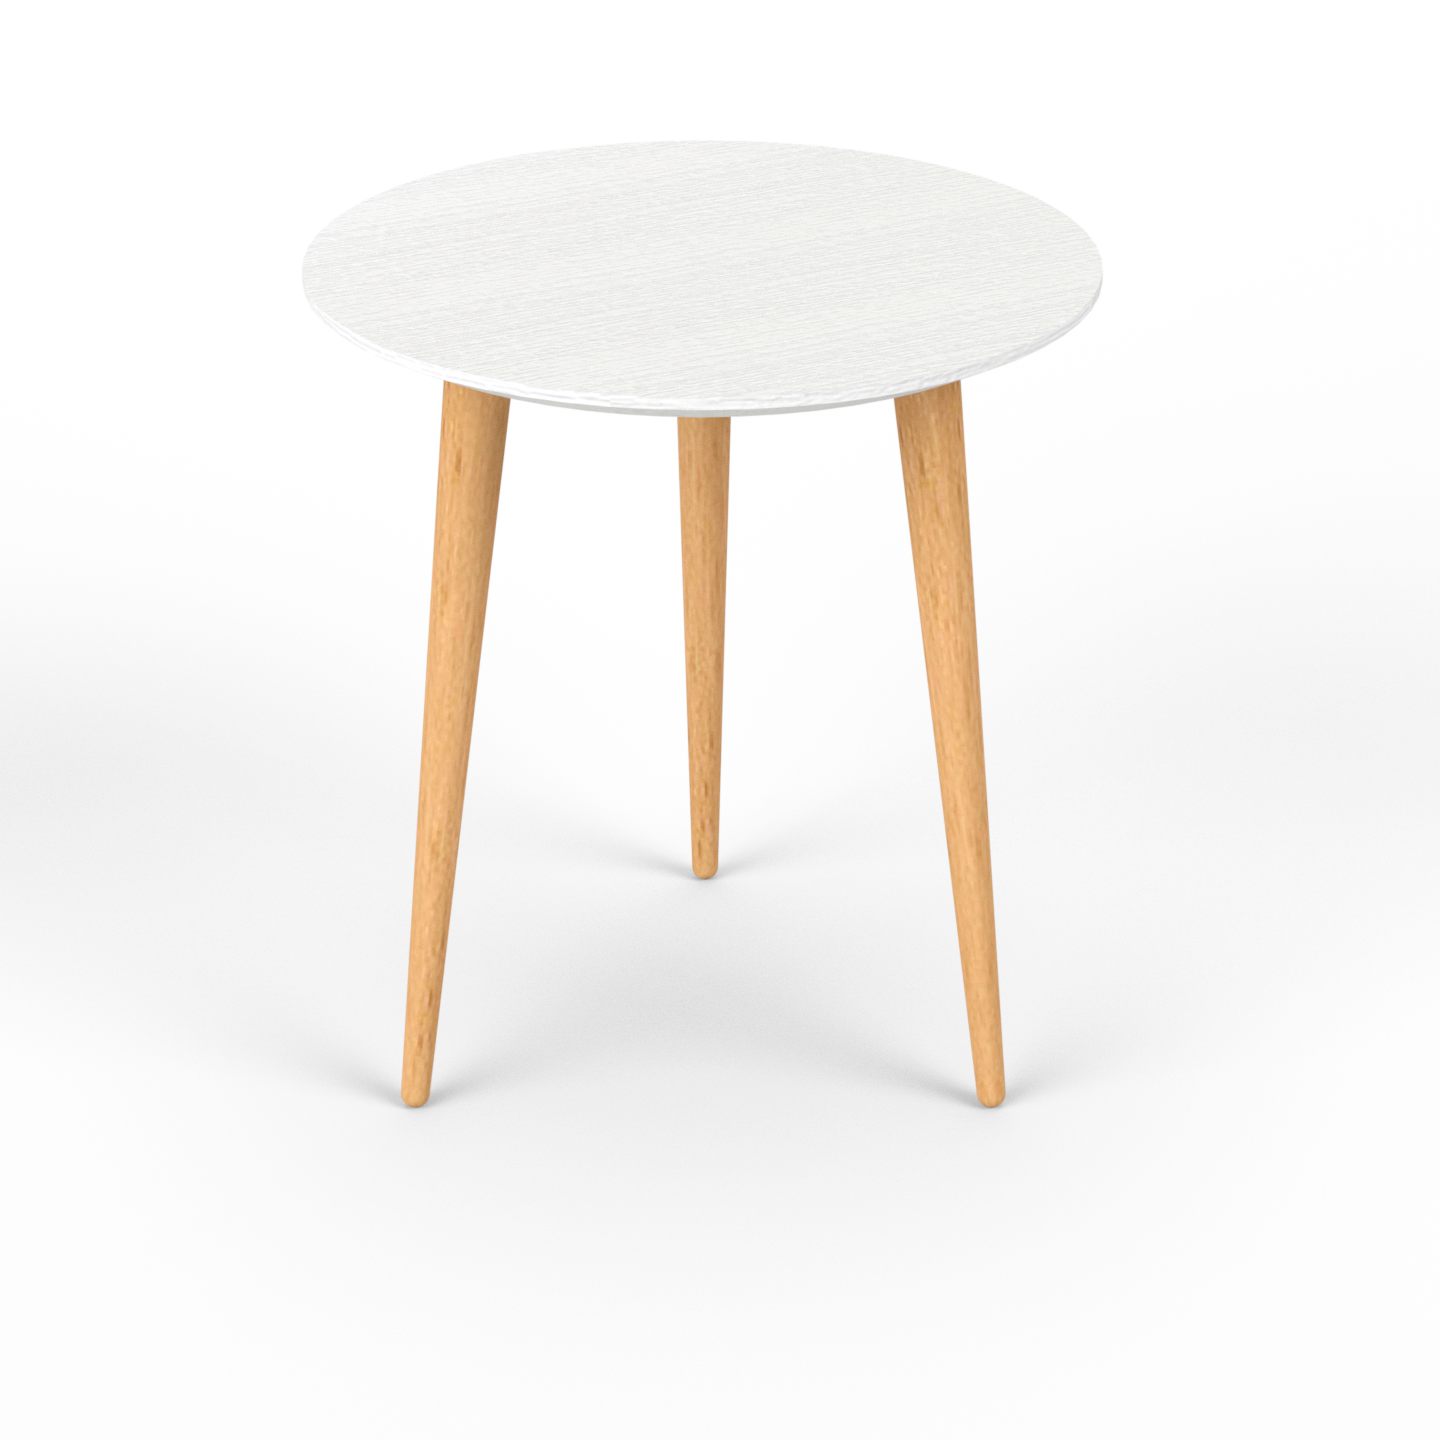 A-Small H-47 Coffee Table